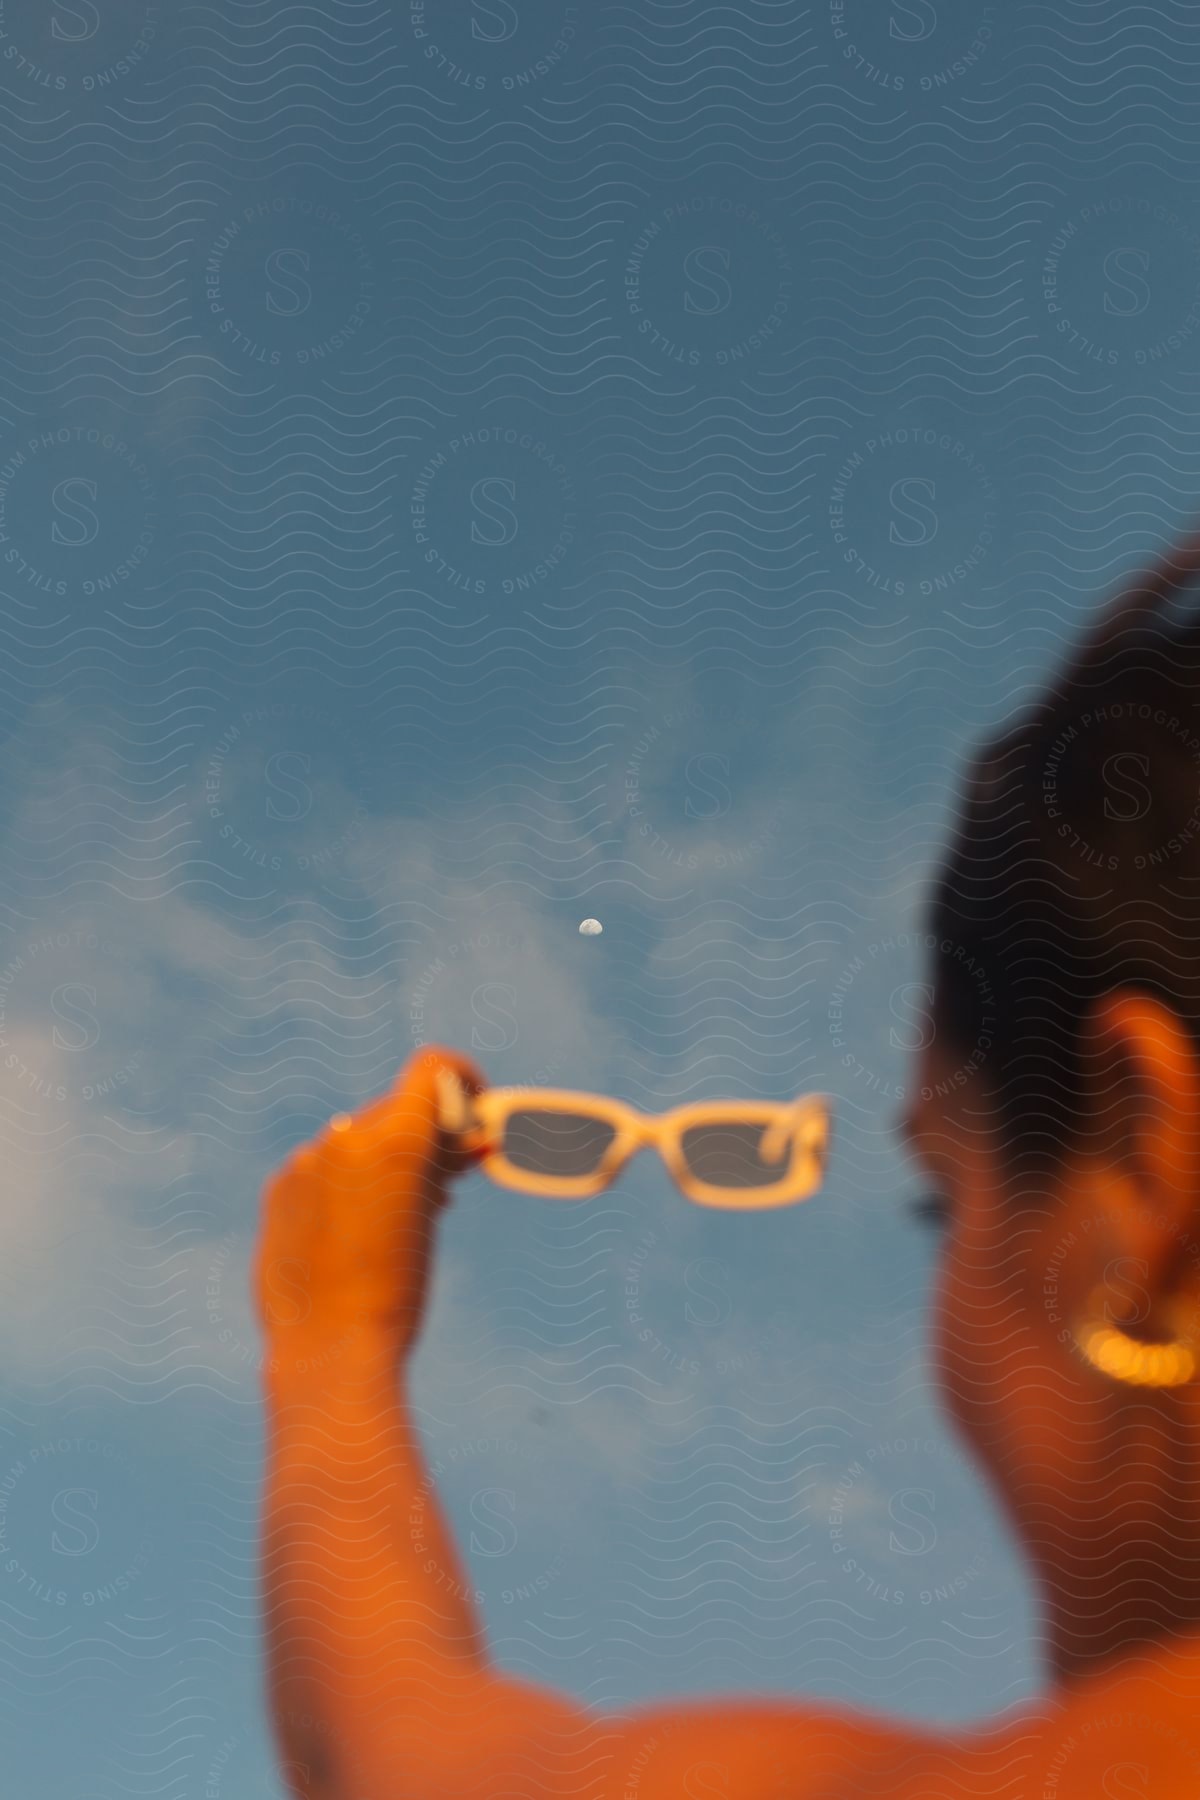 A person holds a pair of sunglasses against a blue sky with a visible moon.